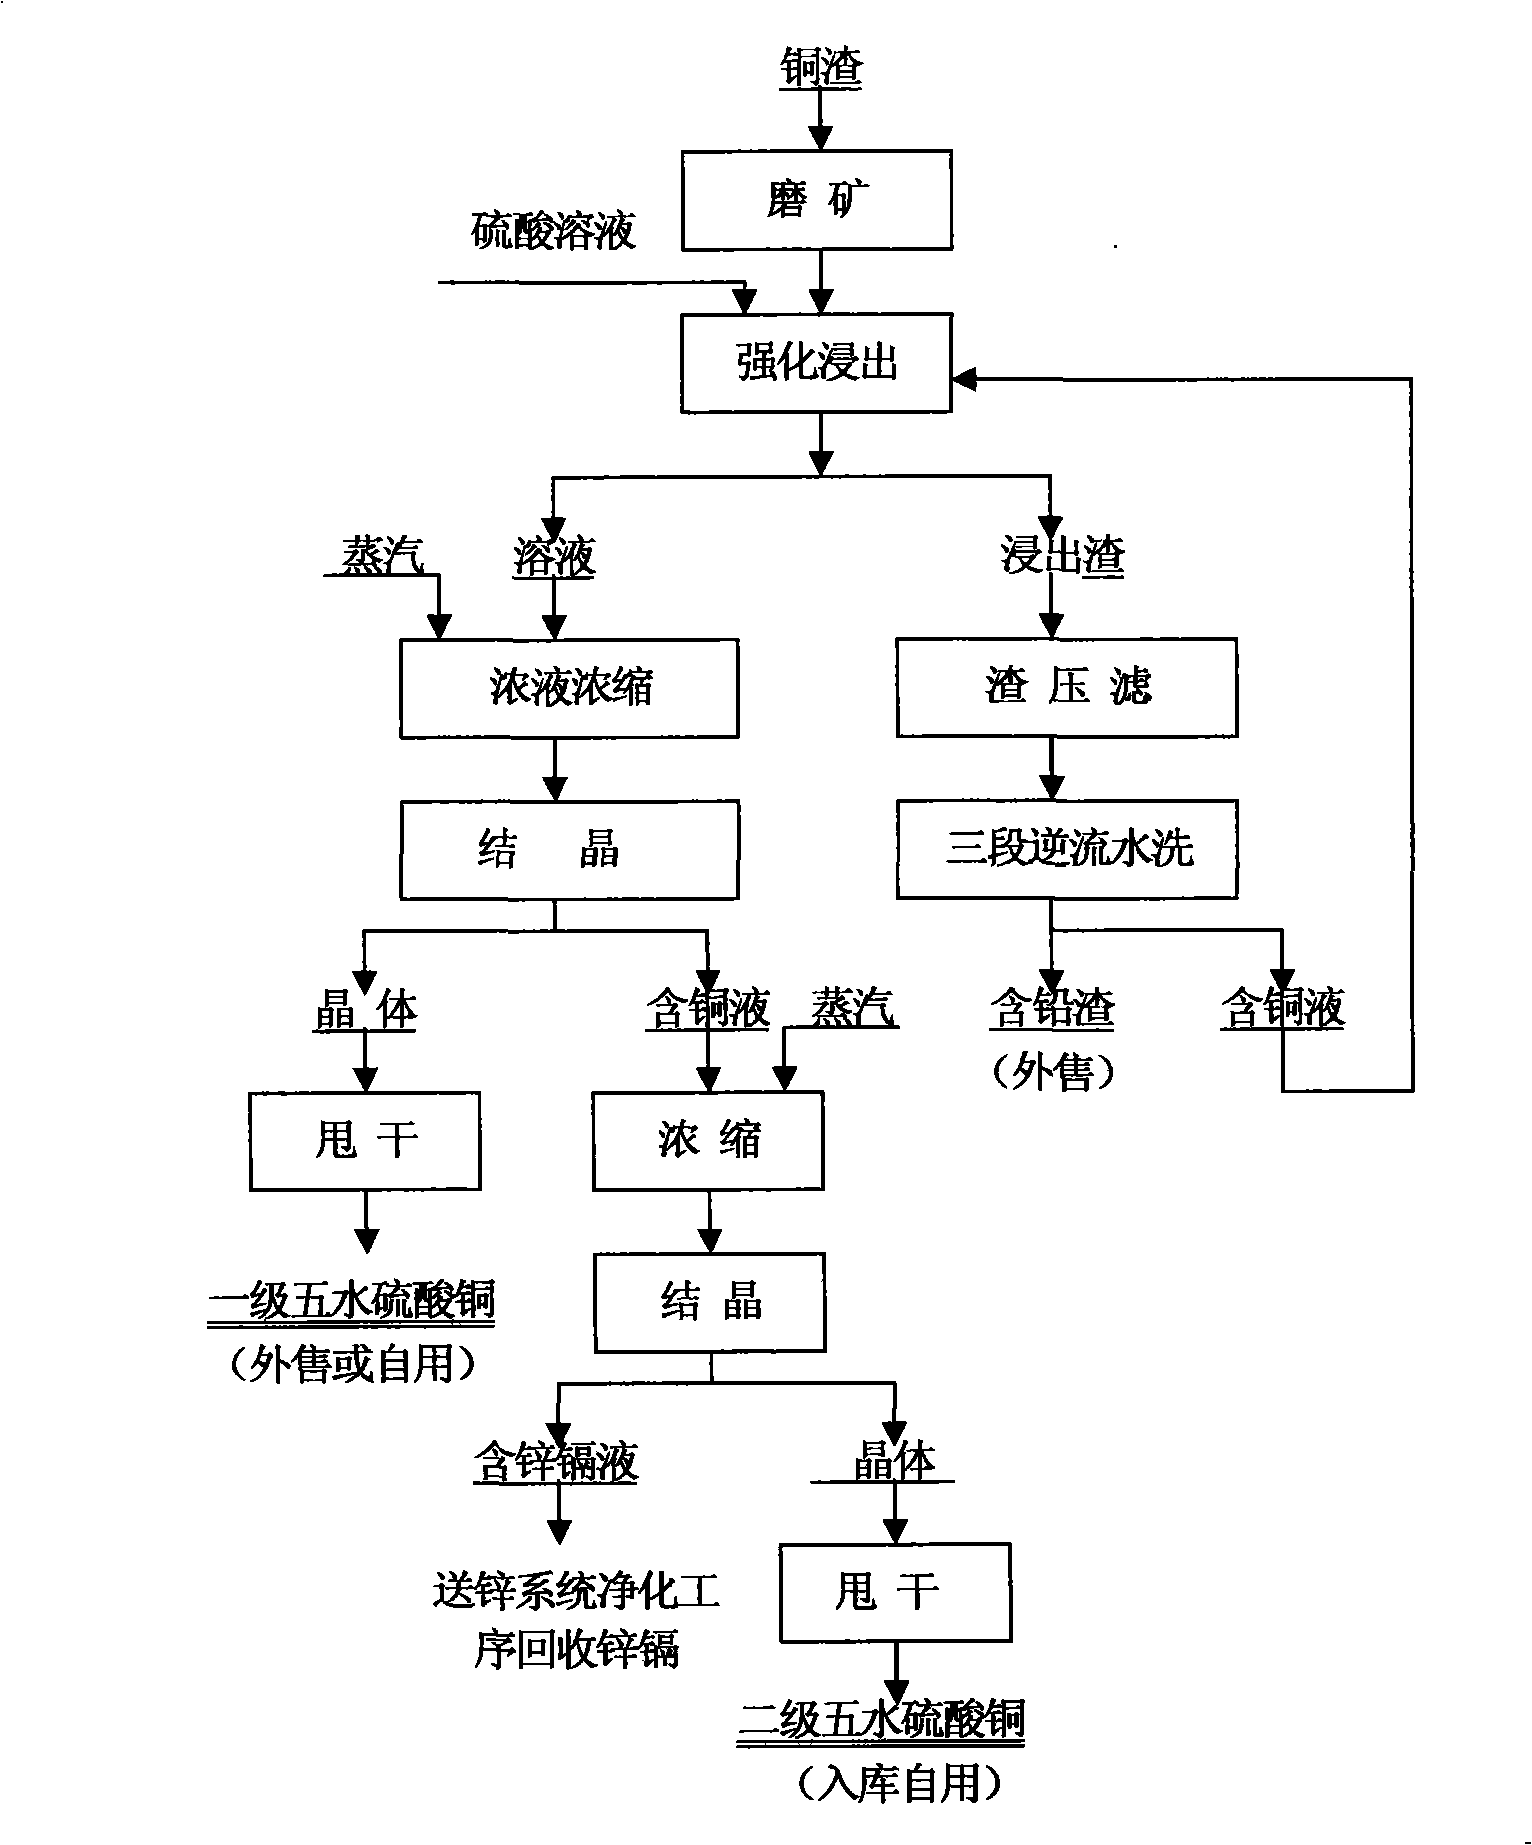 Process method for producing copper sulfate by intensified leaching of copper-containing materials